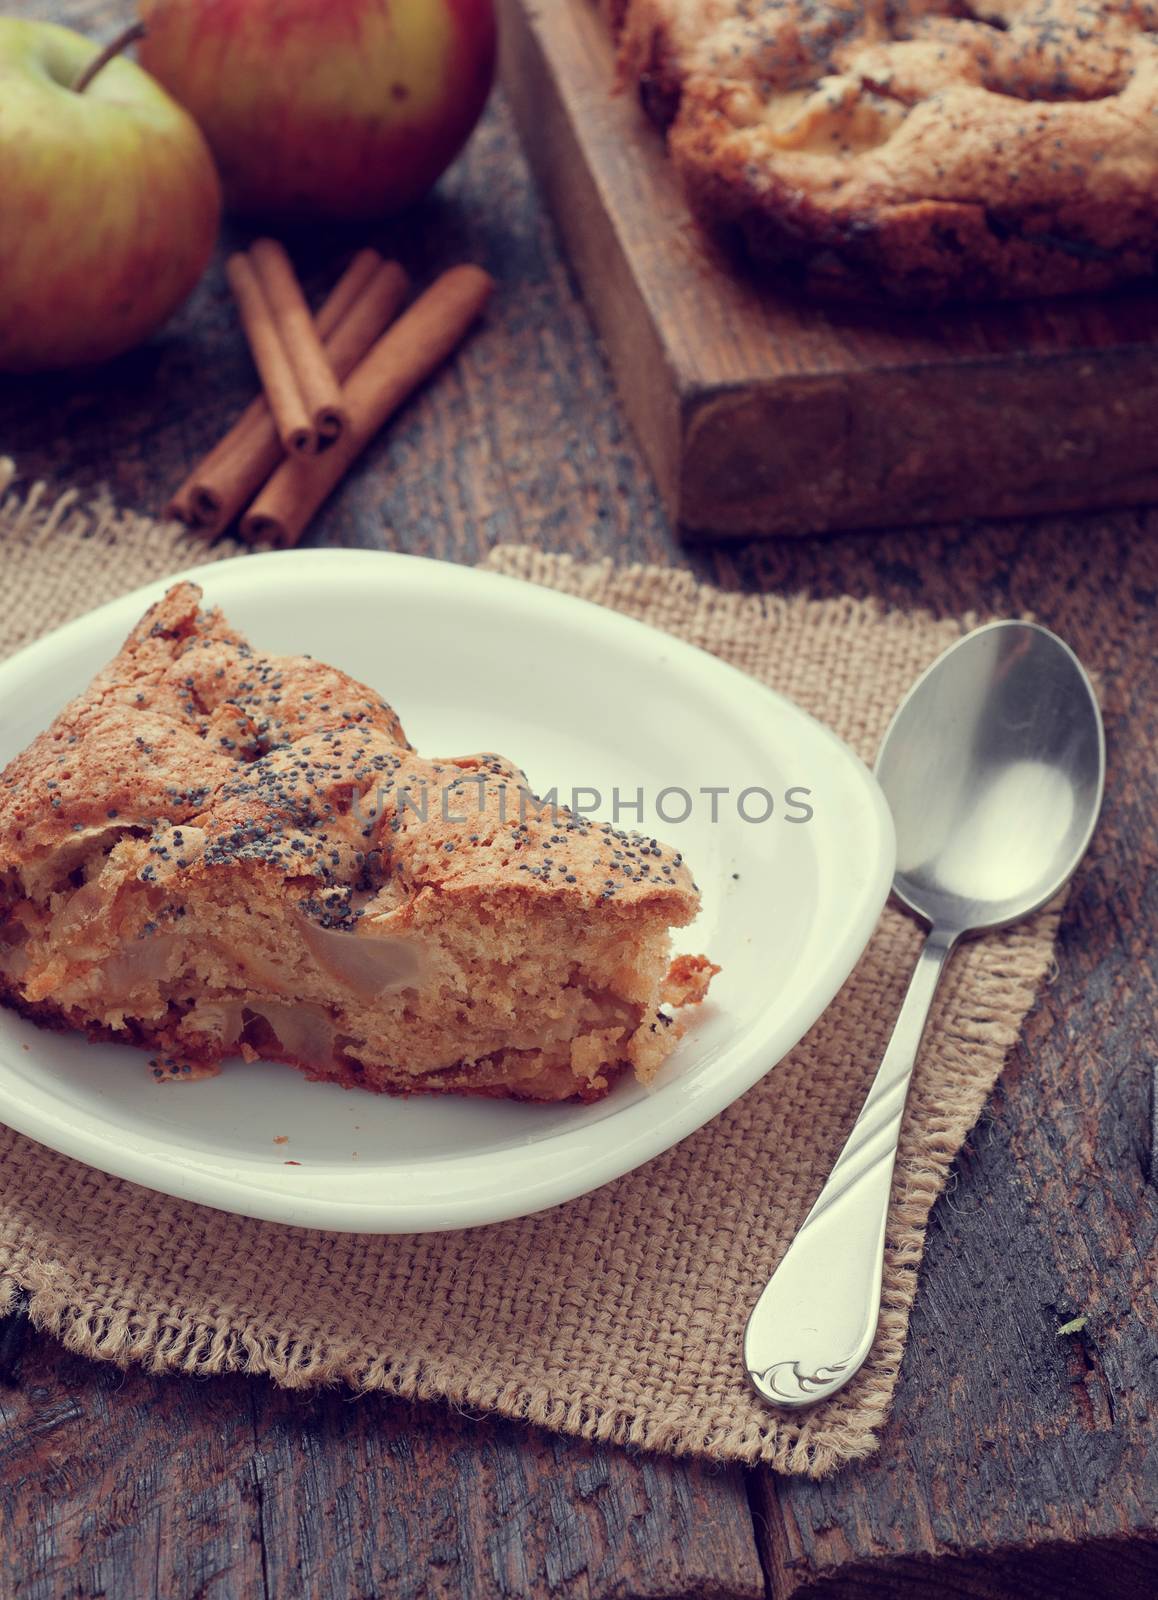 a slice of Apple pie on a wooden table